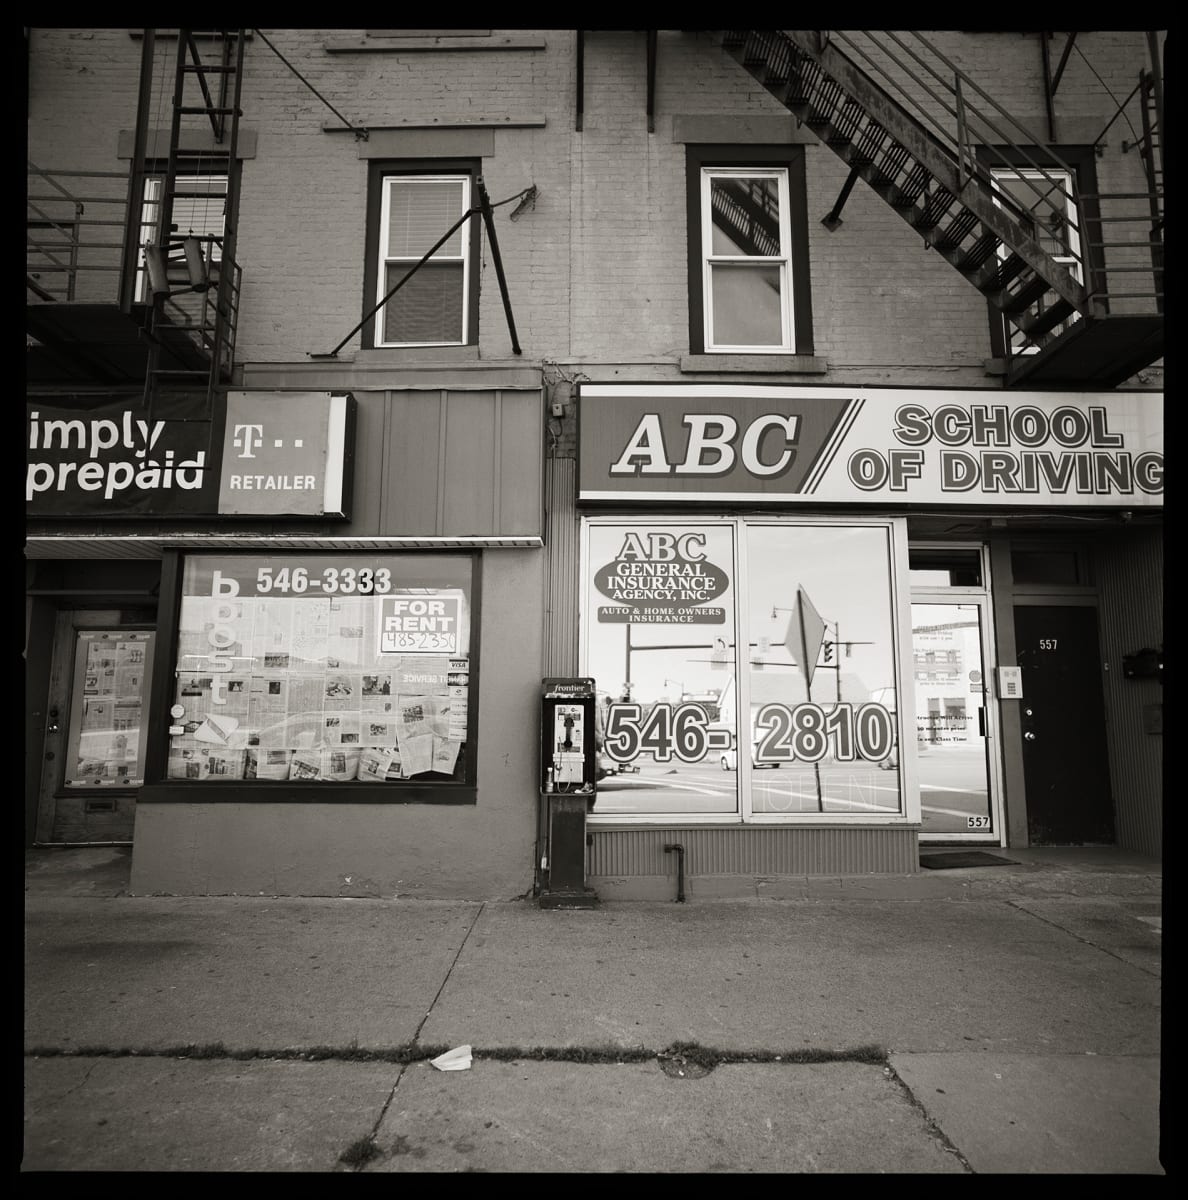 585.232.9384 – ABC School of Driving, 557 State Street, Rochester, NY 14608 by Eric T. Kunsman  Image: ID: A black and white image shows a building with a large glass entrance with advertisements for the ABC School of Driving.  To the left of the entrance there is a payphone.  